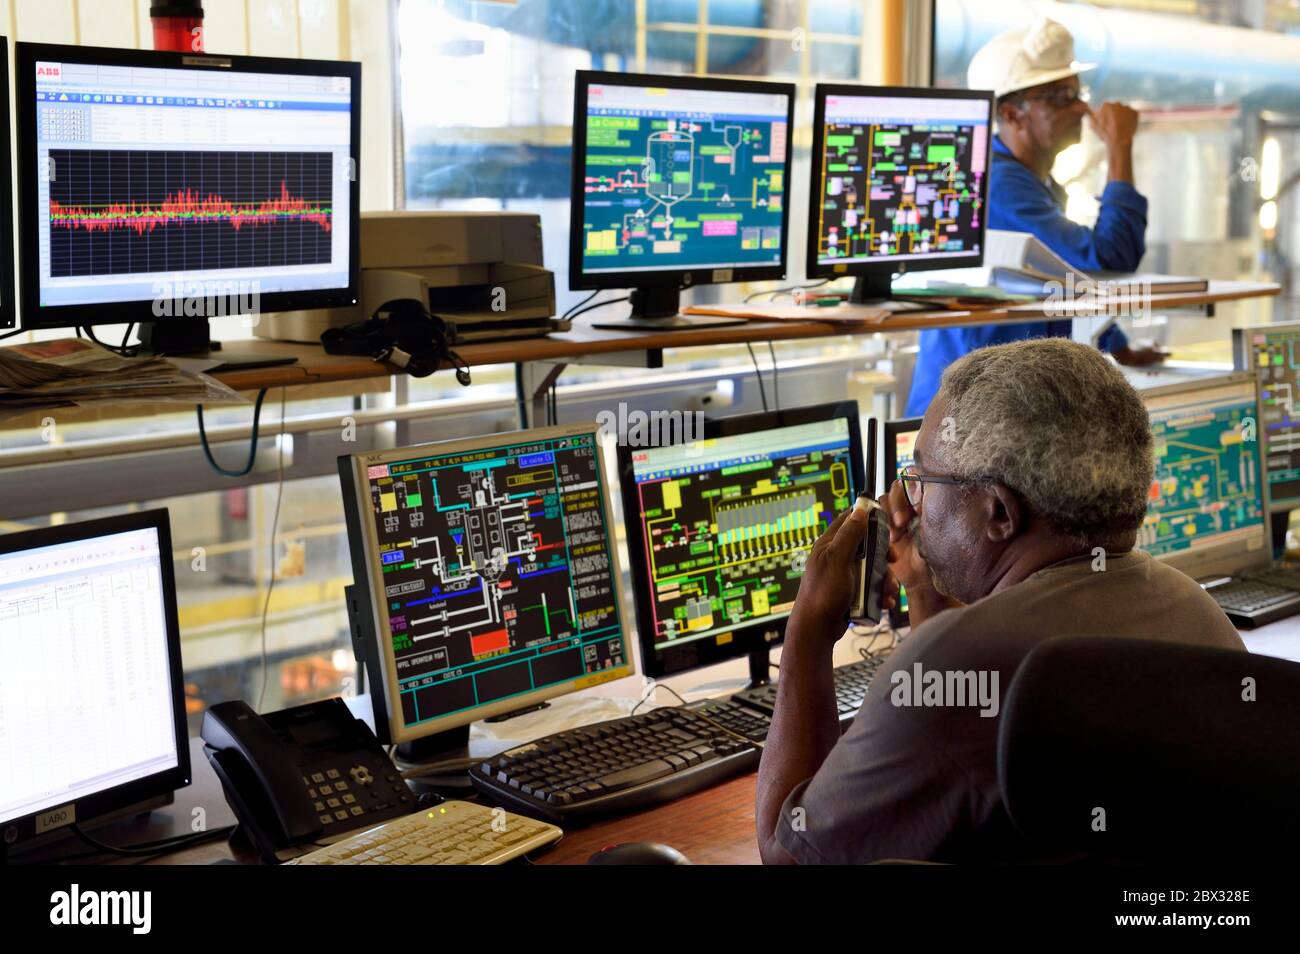 France, Reunion island (French overseas department), Saint-Louis, Le Gol sugar factory using sugar cane, the control room for the entire manufacturing process Stock Photo